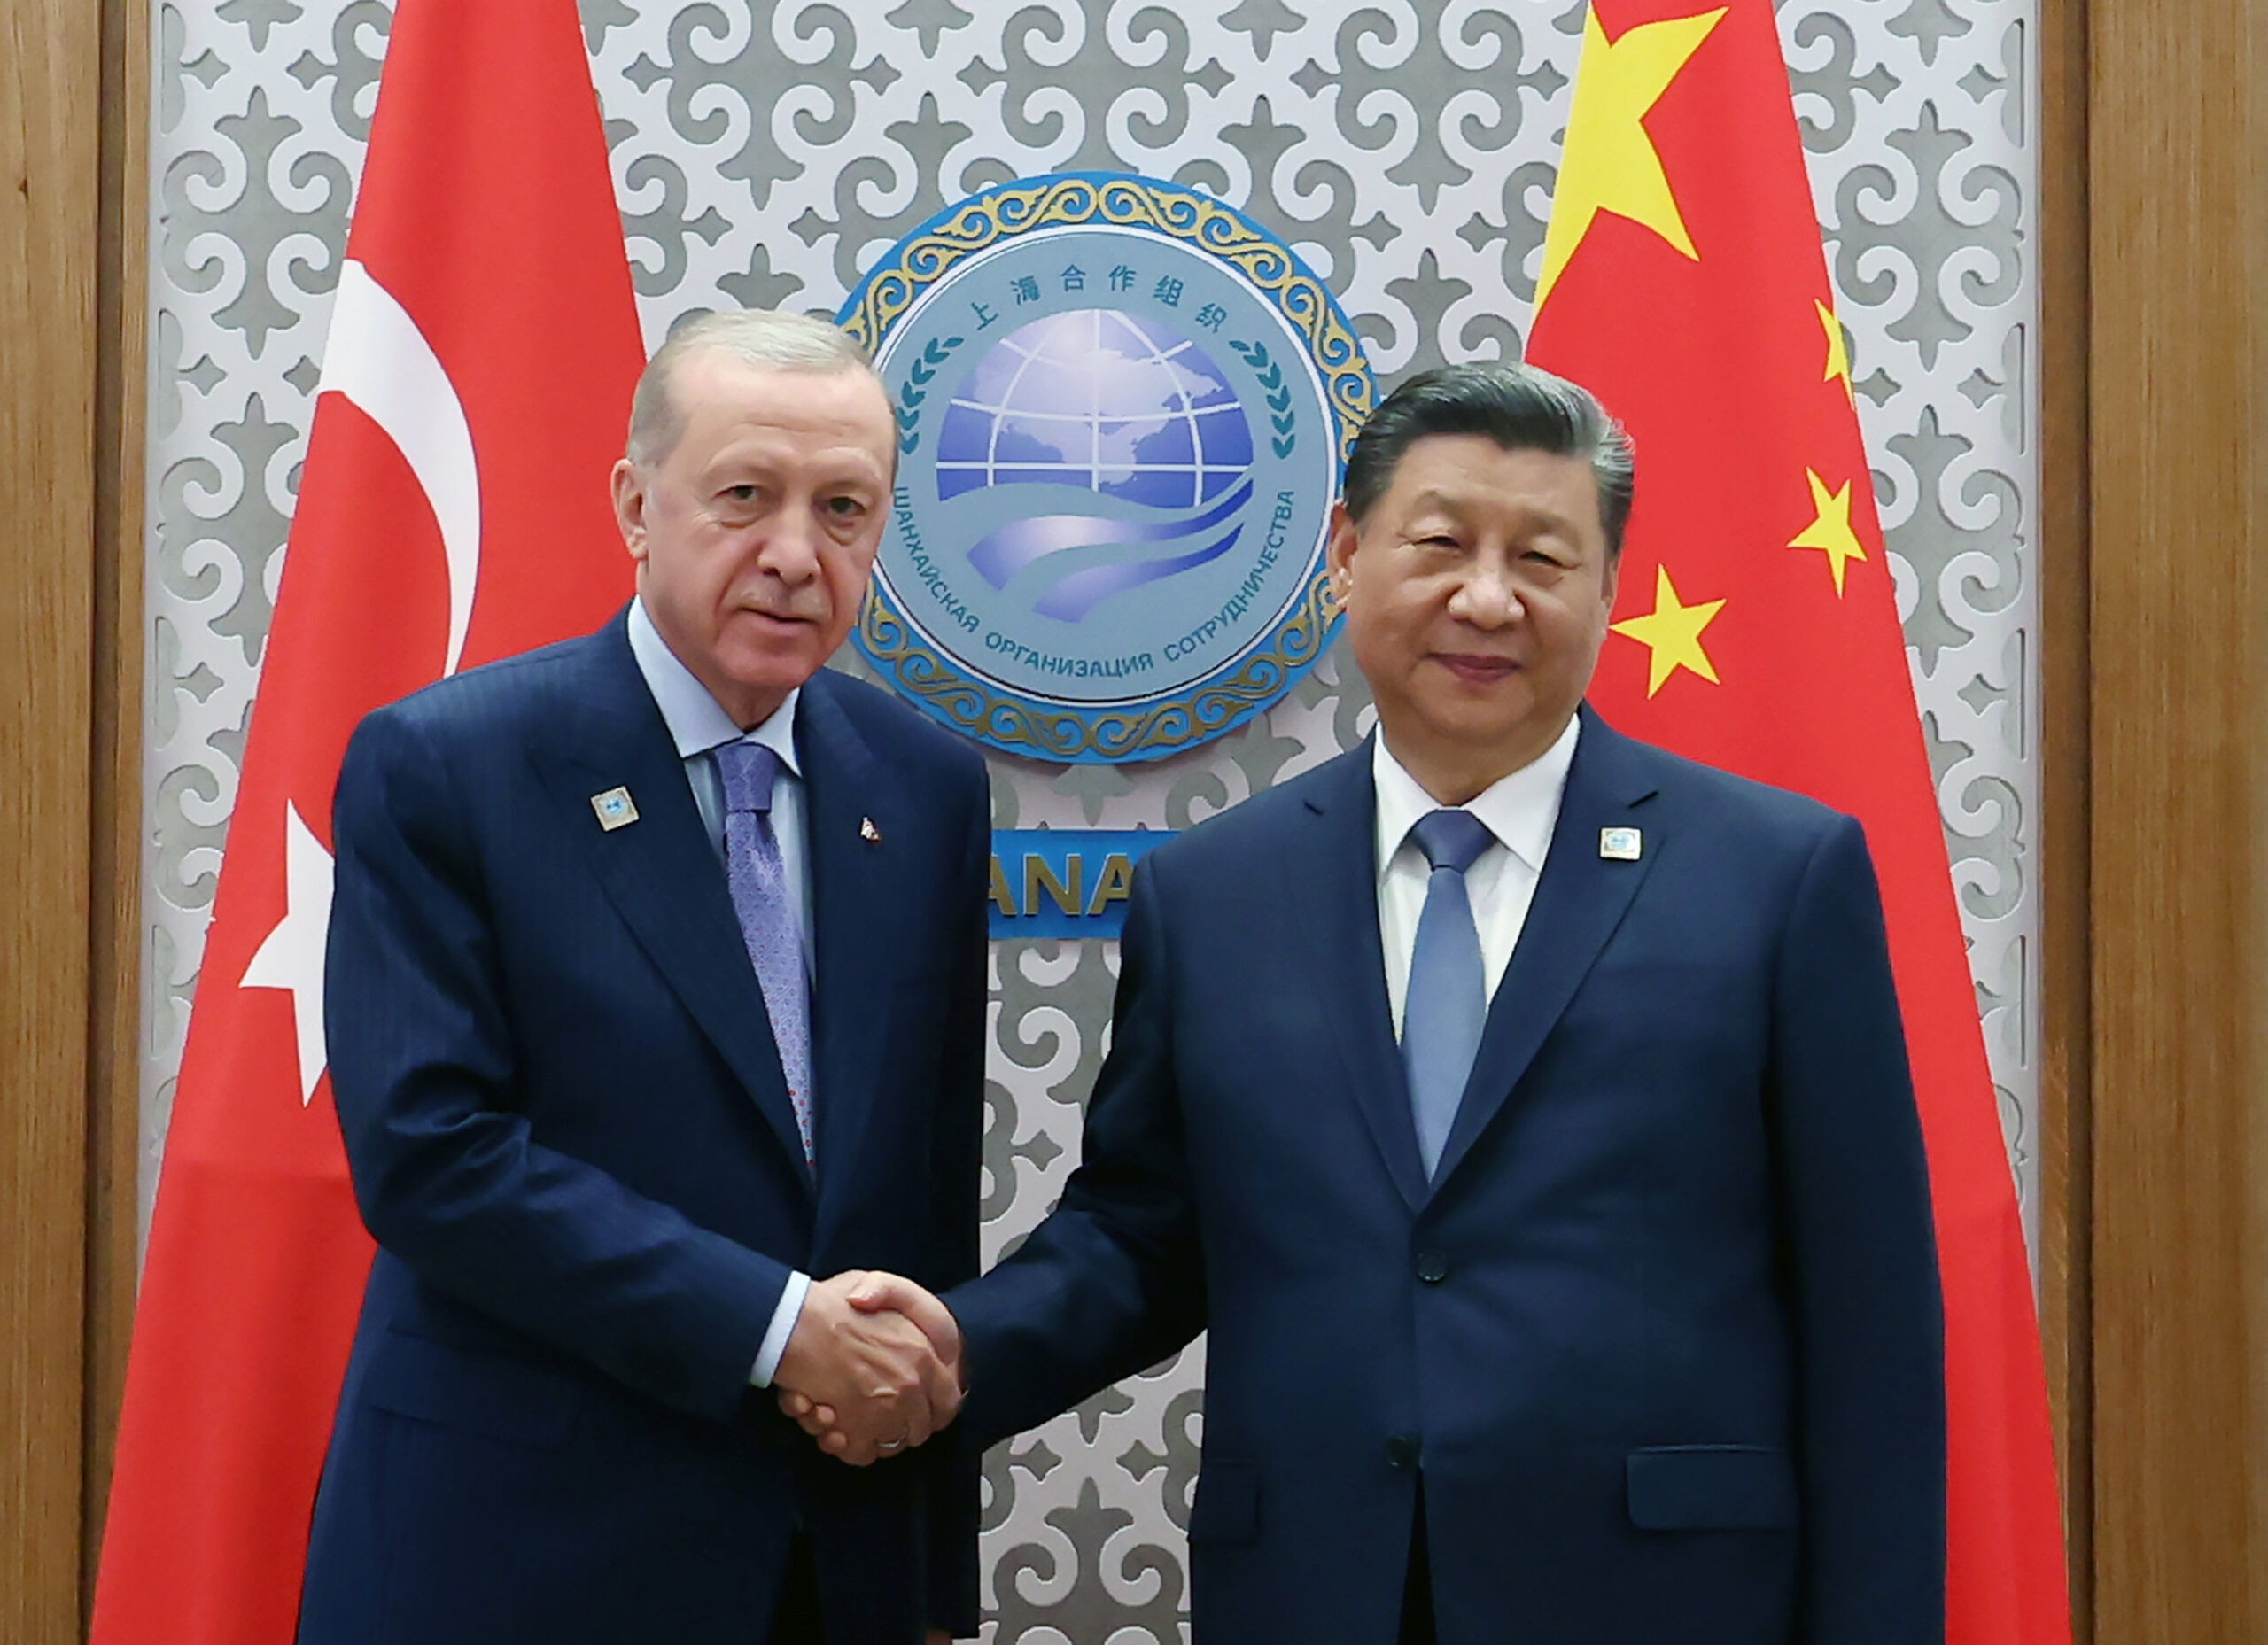 President Erdogan and Xi Jinping discuss key global and regional issues at SCO Summit